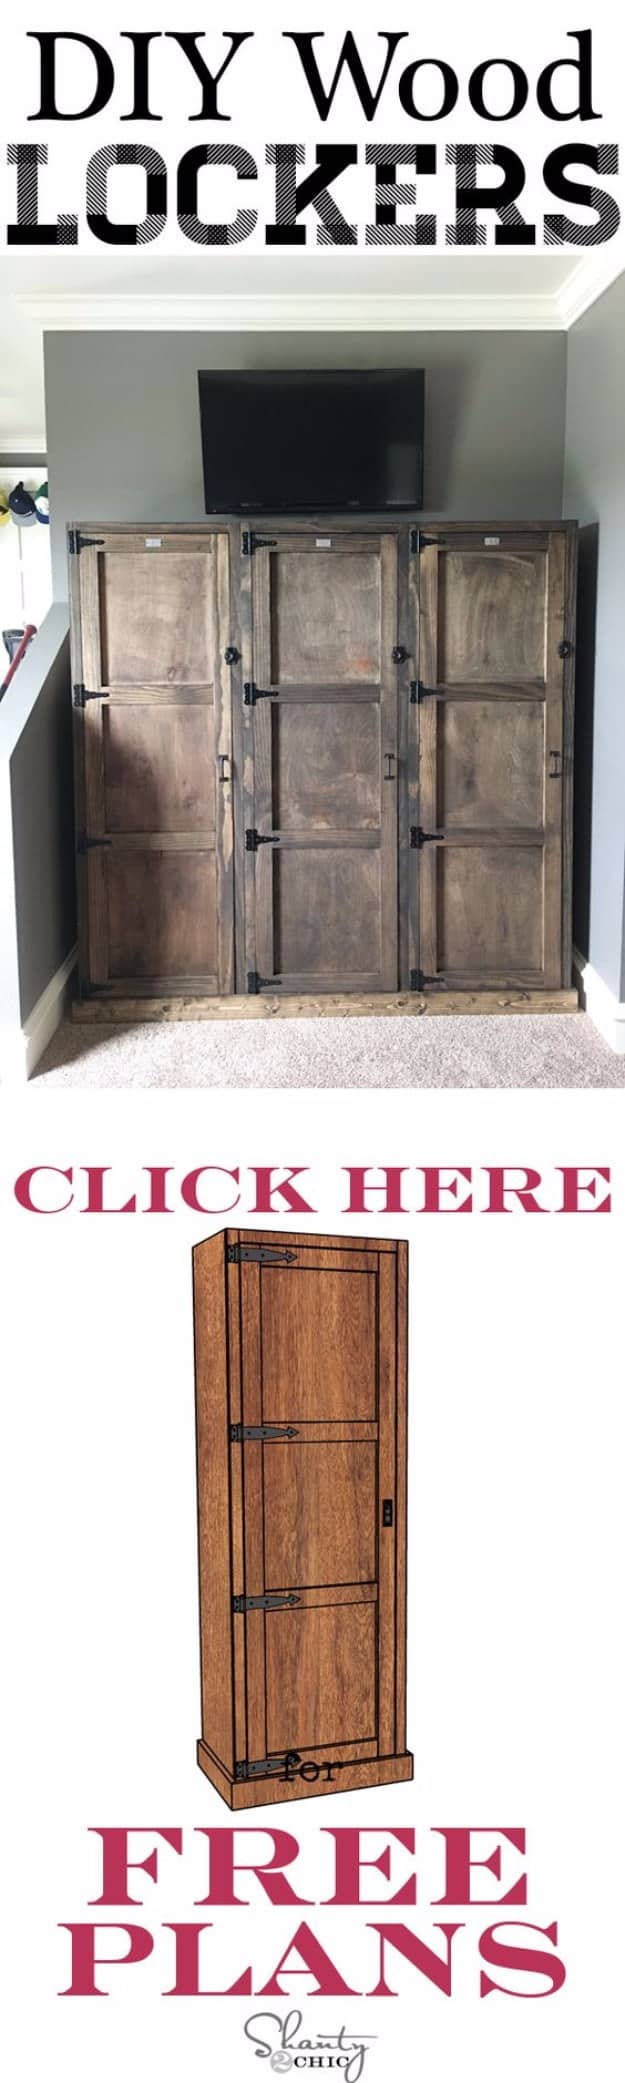 DIY Projects Your Garage Needs -DIY Garage Locker System - Do It Yourself Garage Makeover Ideas Include Storage, Organization, Shelves, and Project Plans for Cool New Garage Decor http://diyjoy.com/diy-projects-garage